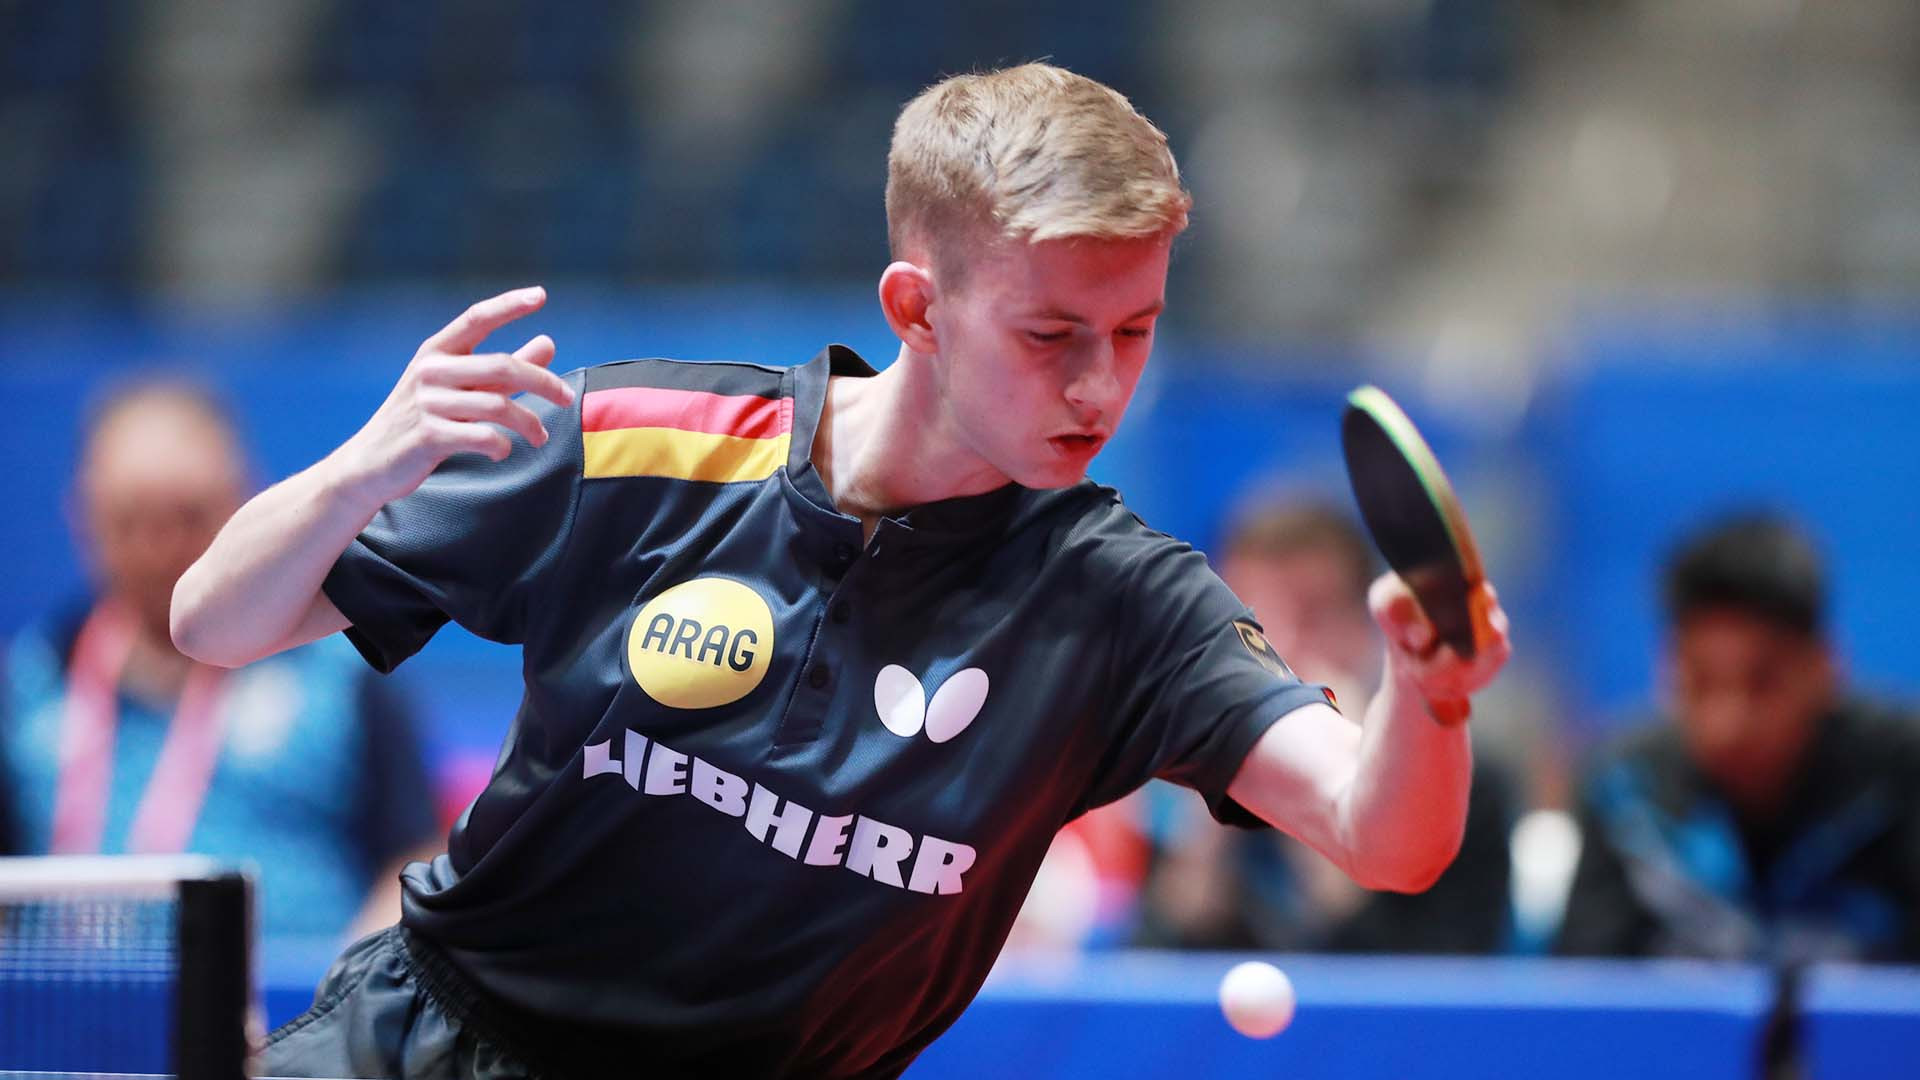 The group stages of the boys' and girls' singles got underway at the ITTF World Junior Championships in Bendigo, Australia ©ITTF